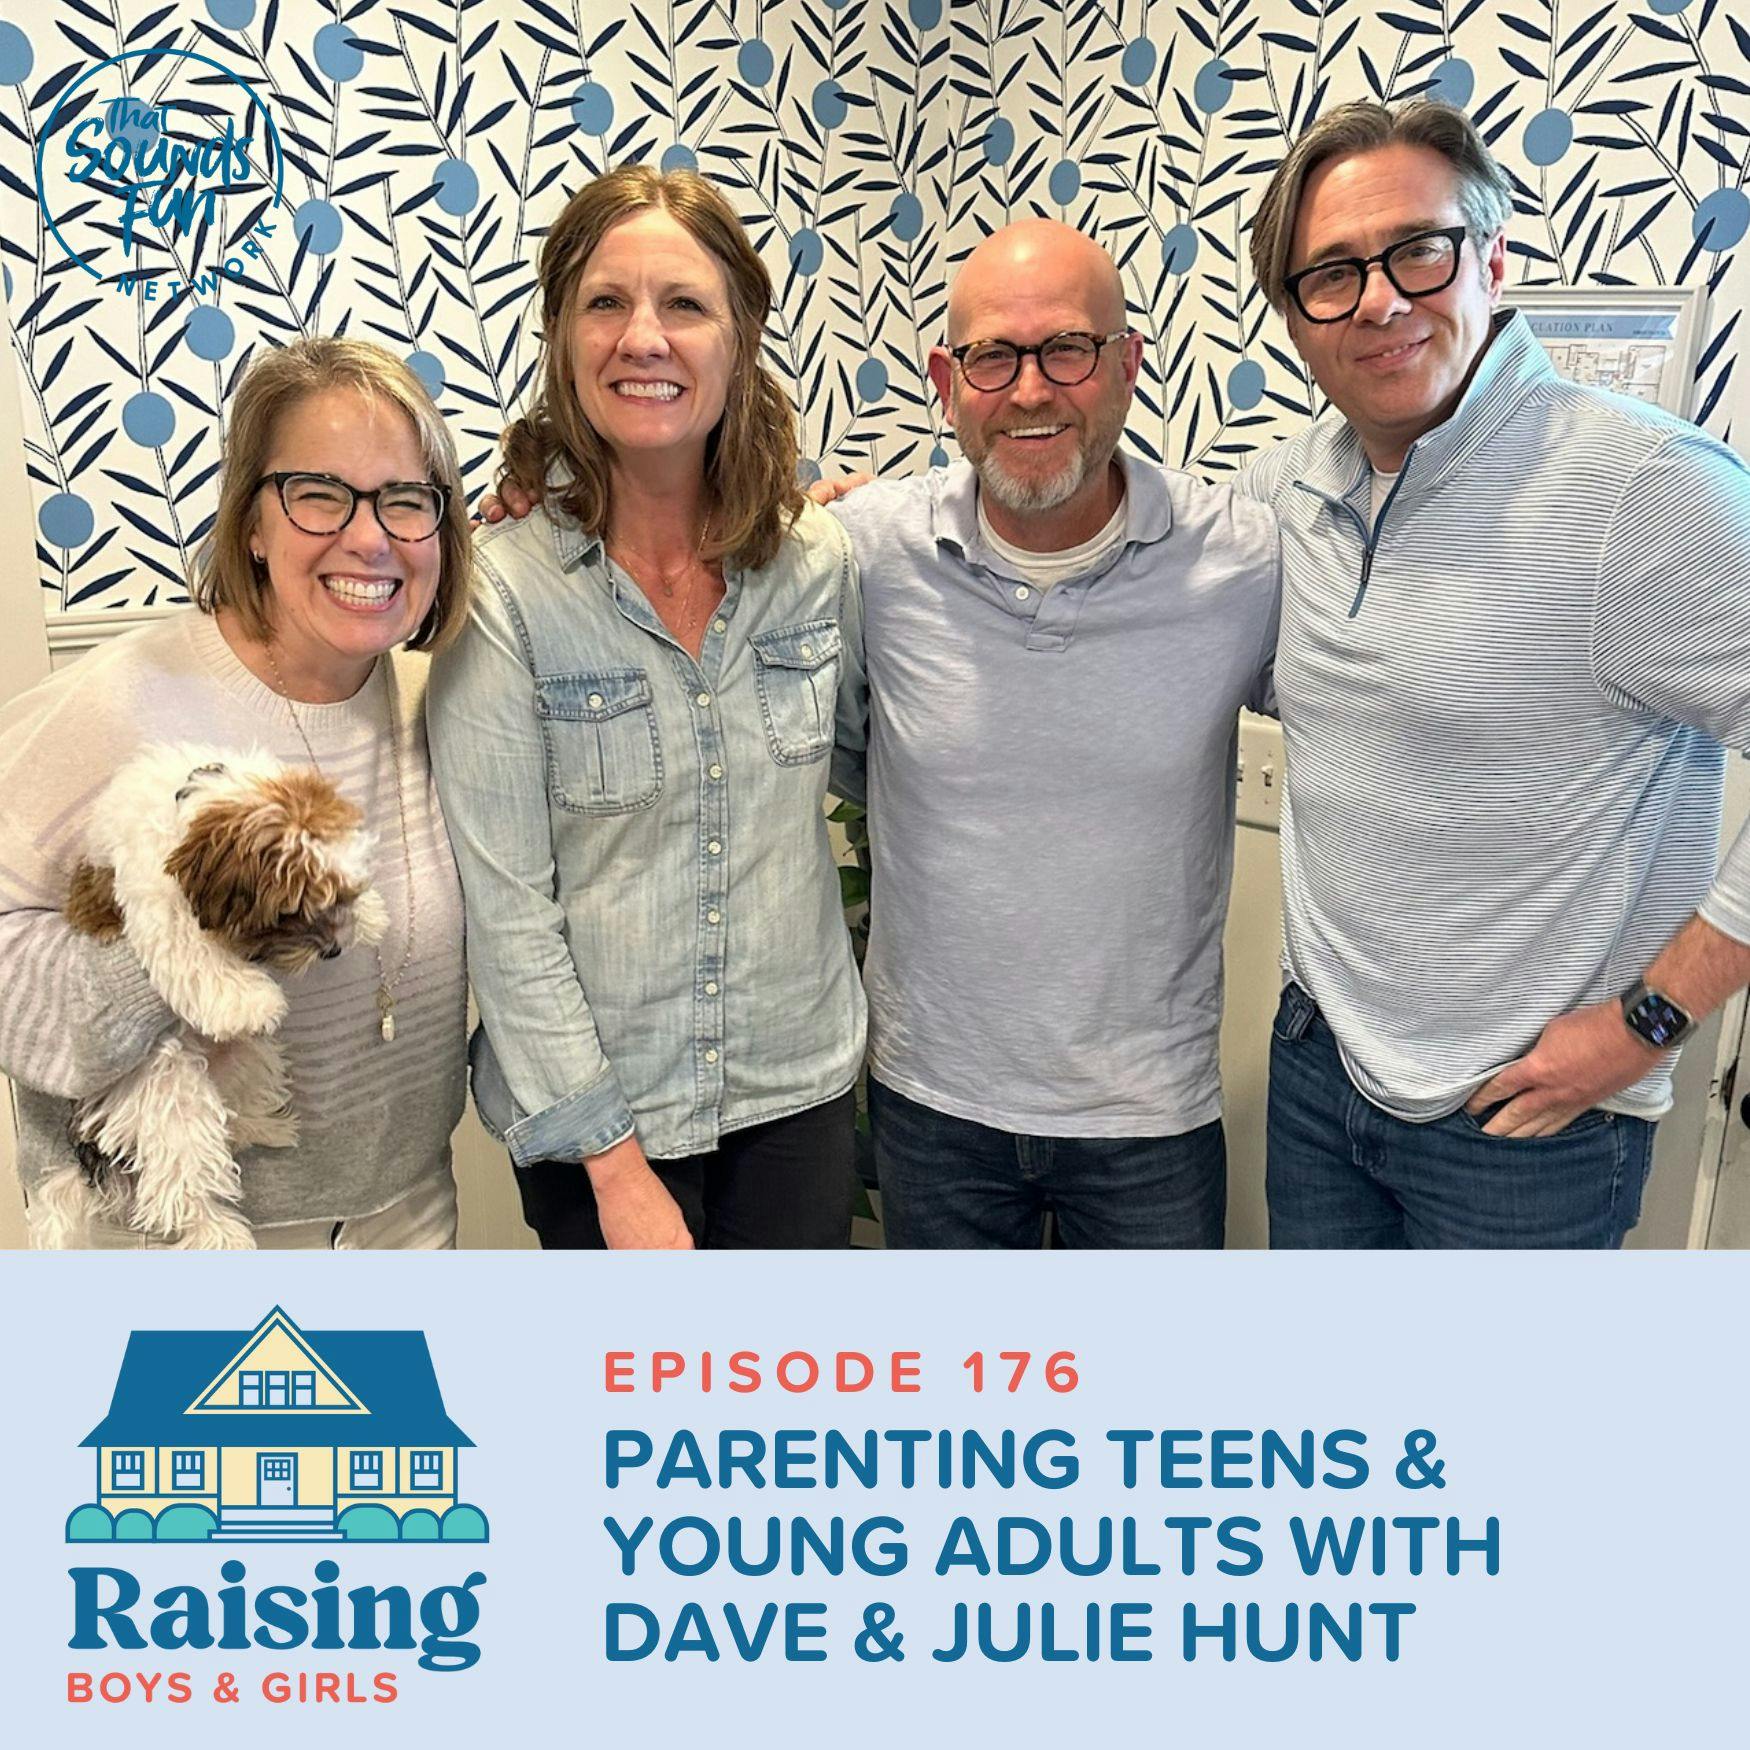 Episode 176: Parenting Teens & Young Adults with Dave & Julie Hunt